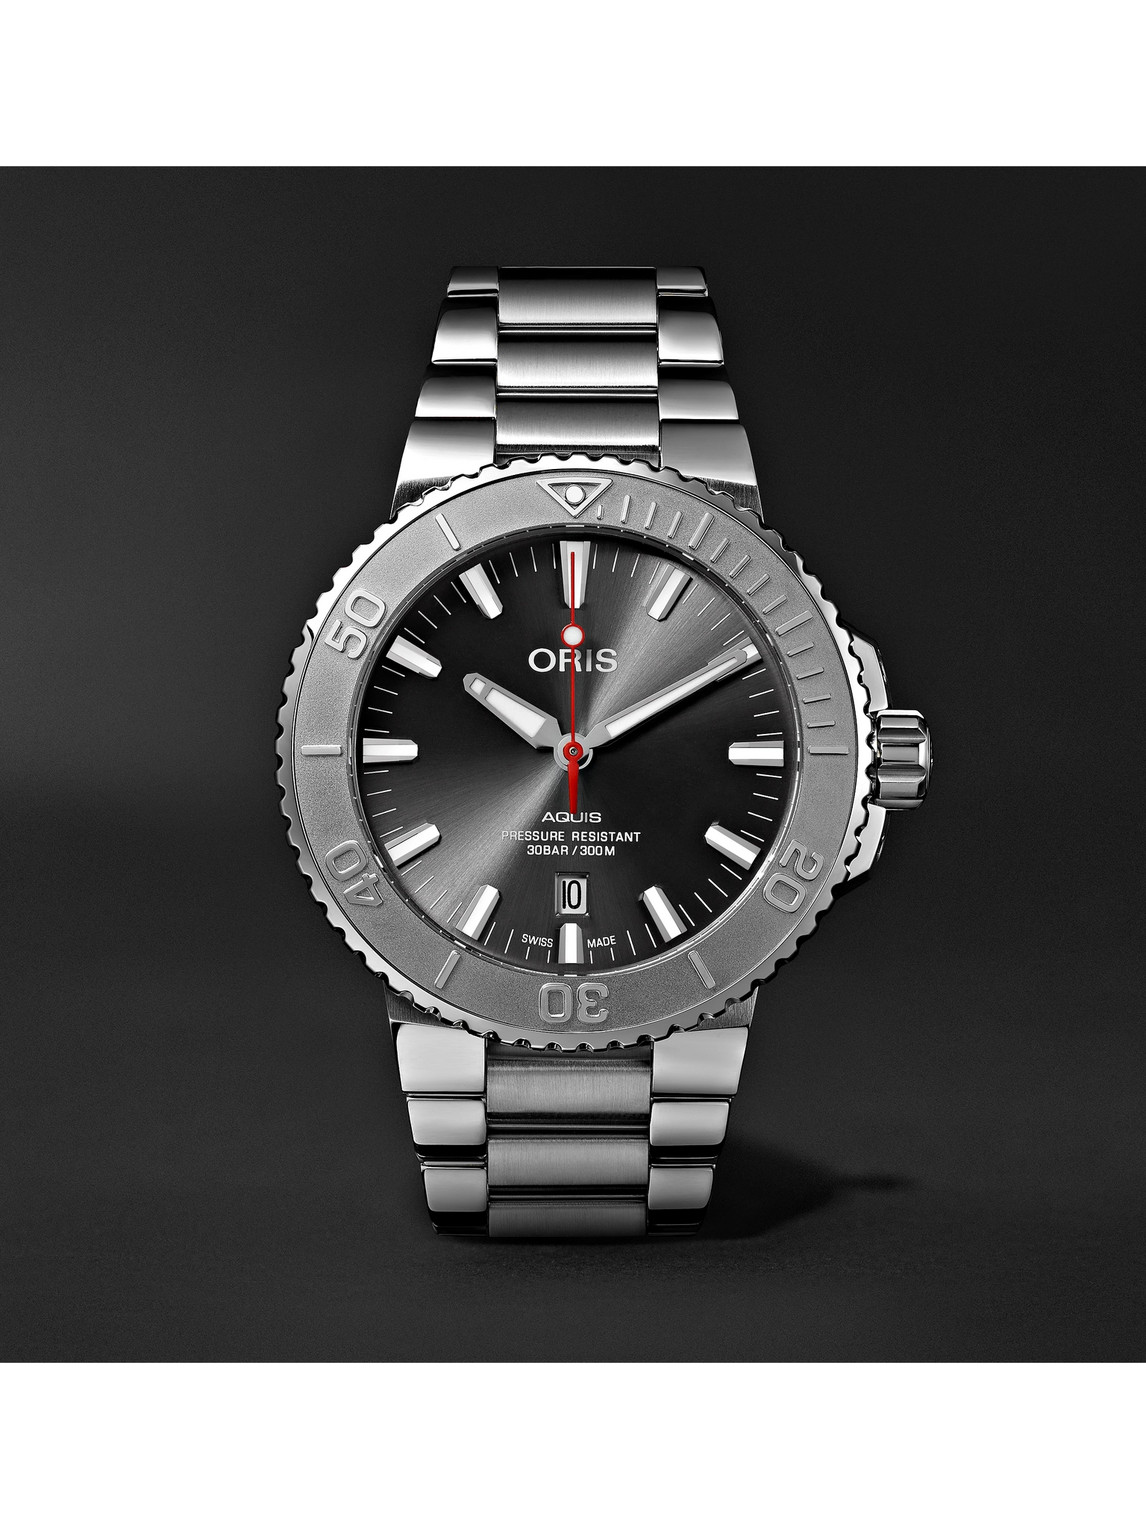 Aquis Date Relief Automatic 43.5mm Stainless Steel Watch, Ref. No. 01 733 7730 4153-07 8 24 05PEB